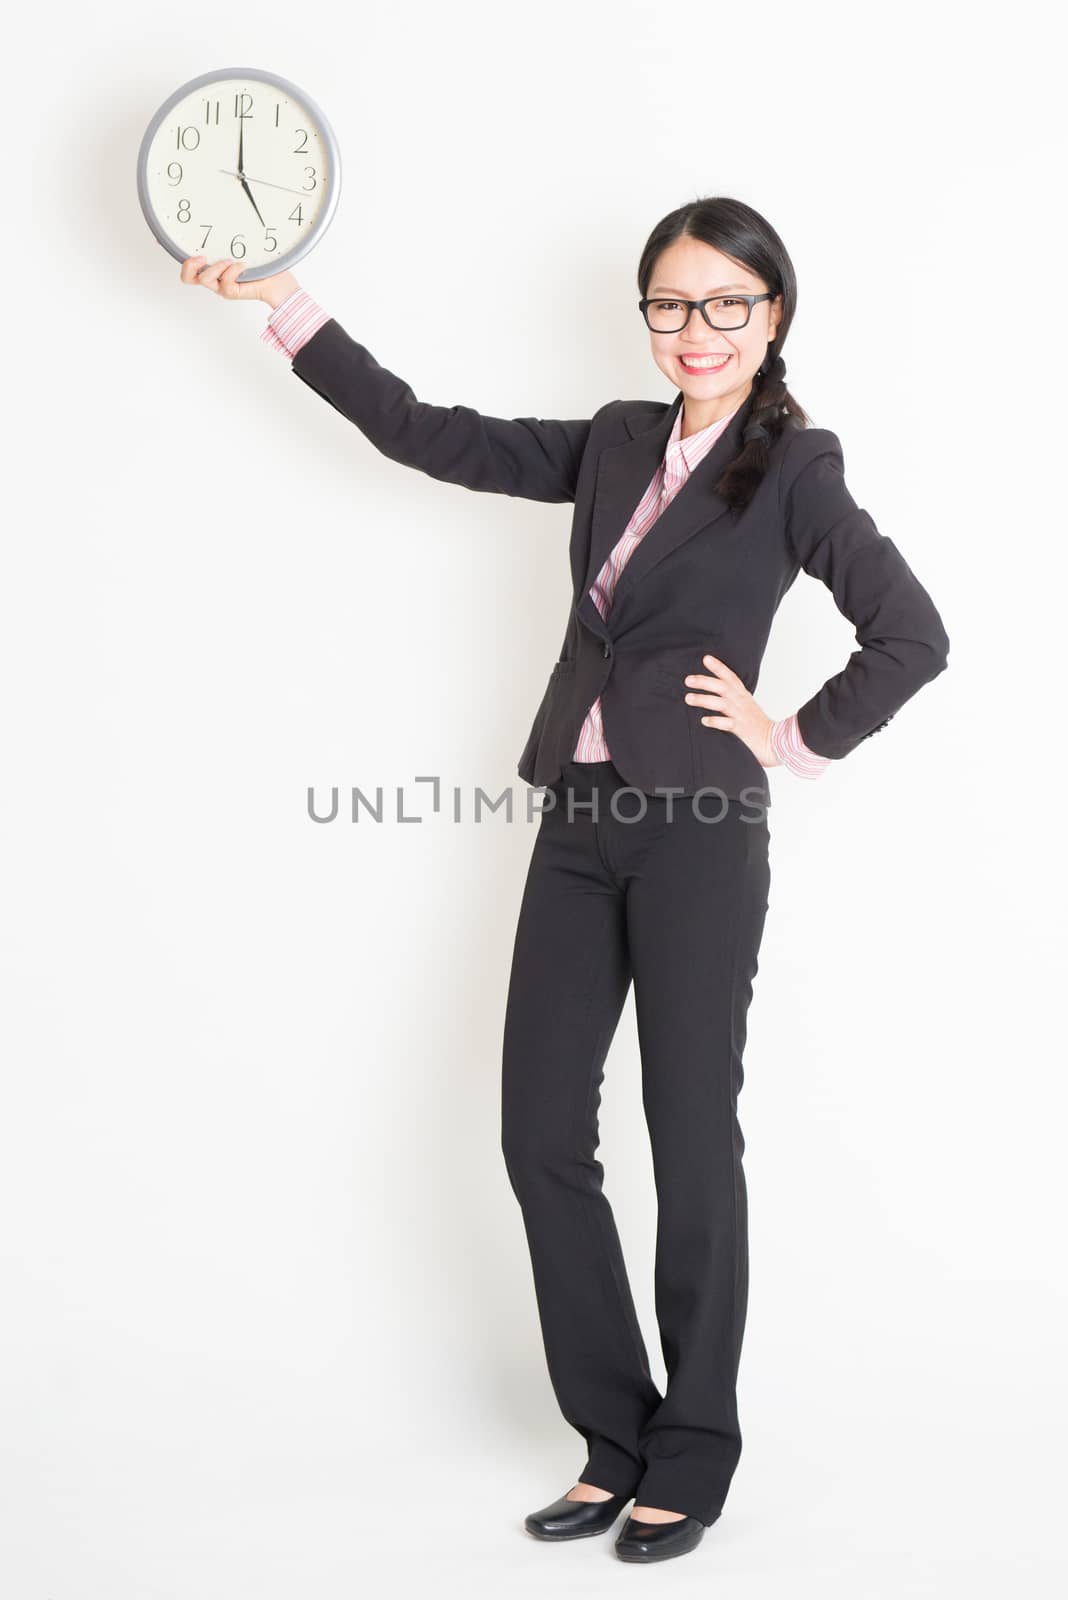 Full length front view of young Asian businesswoman in formalwear hand holding clock at 5pm, standing on plain background.